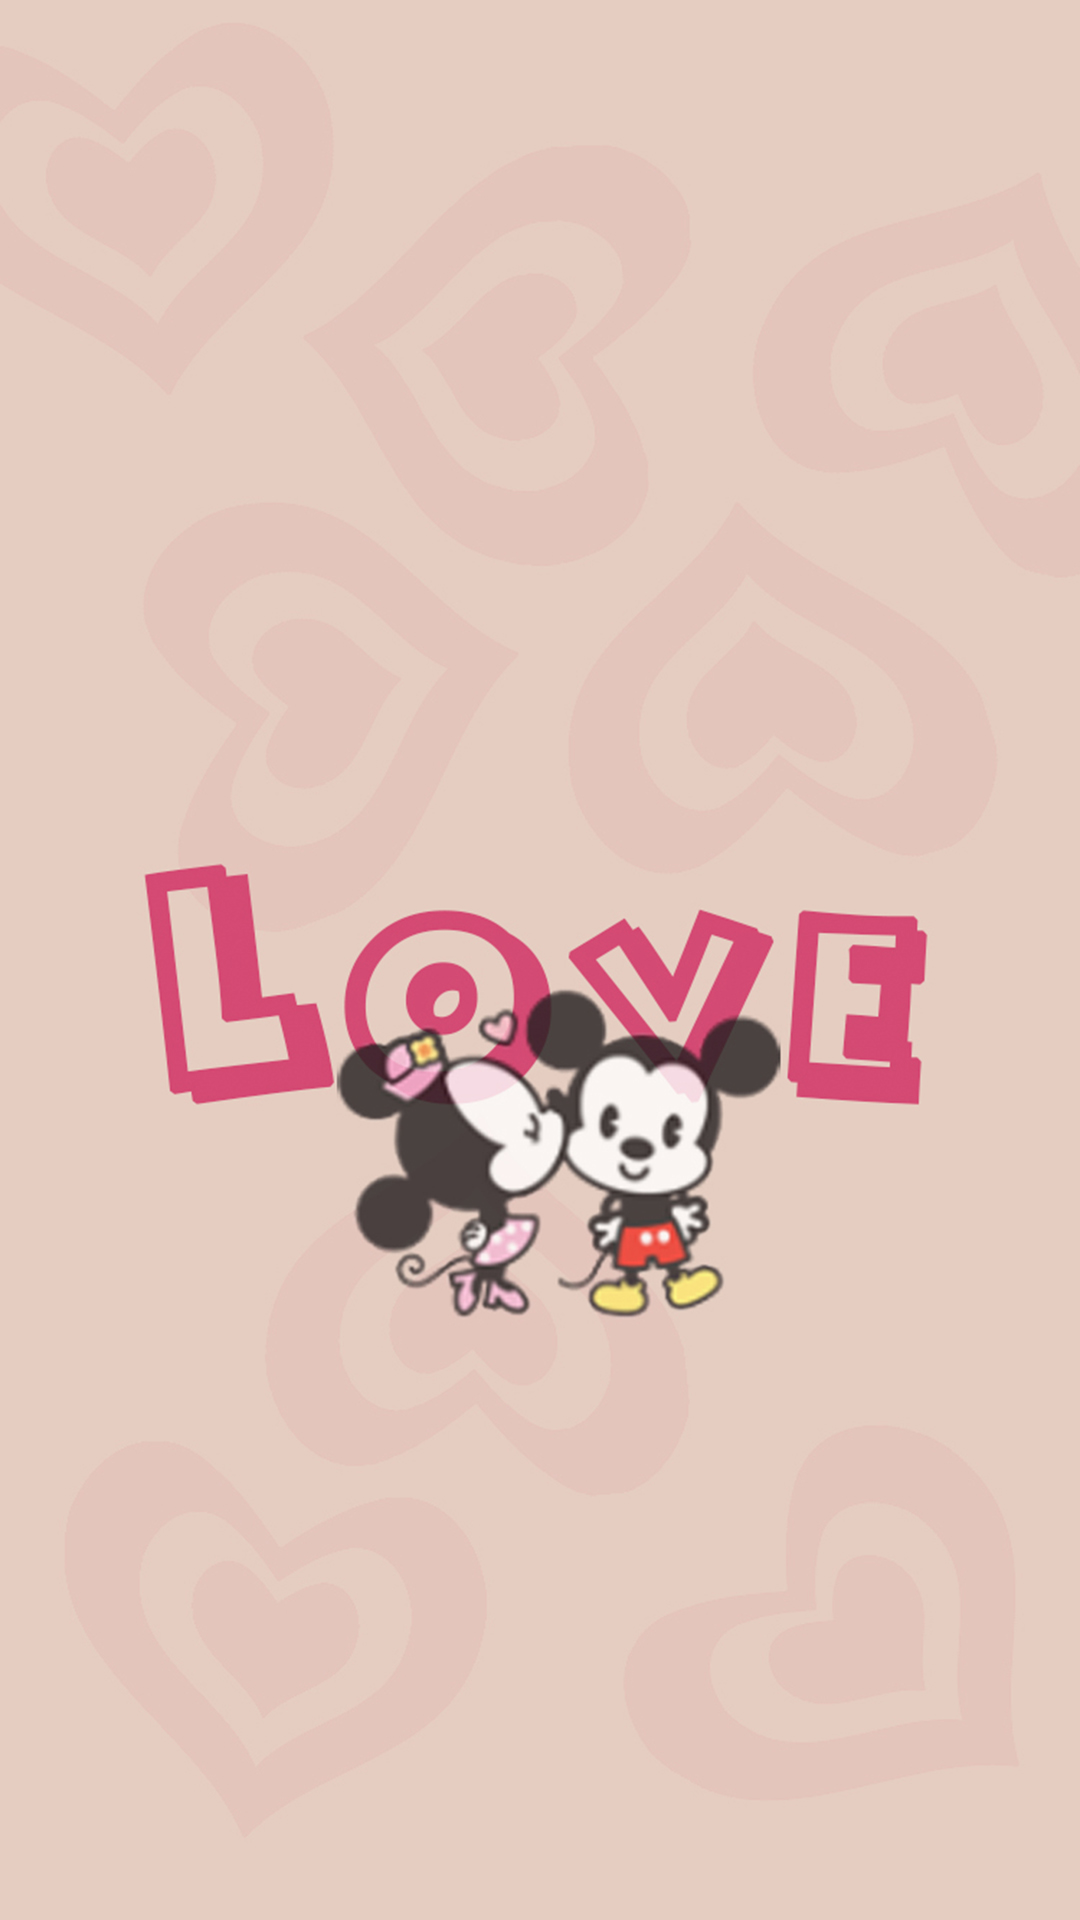 48+] Minnie Mouse Wallpaper for iPhone ...